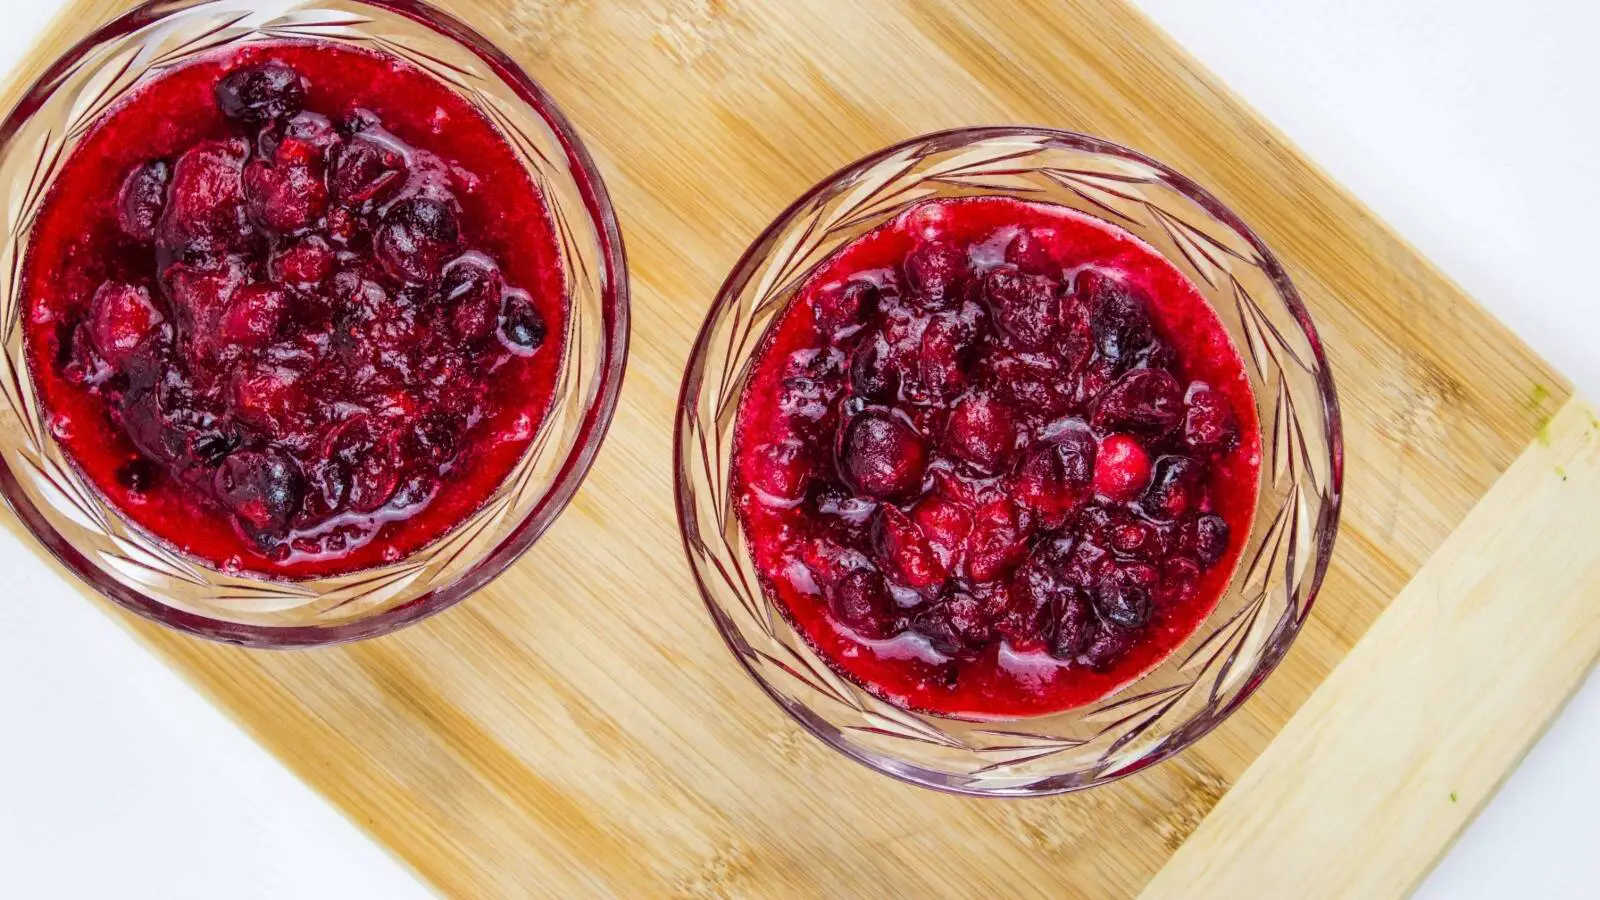 Two bowls of cranberry sauce on a wooden cutting board.